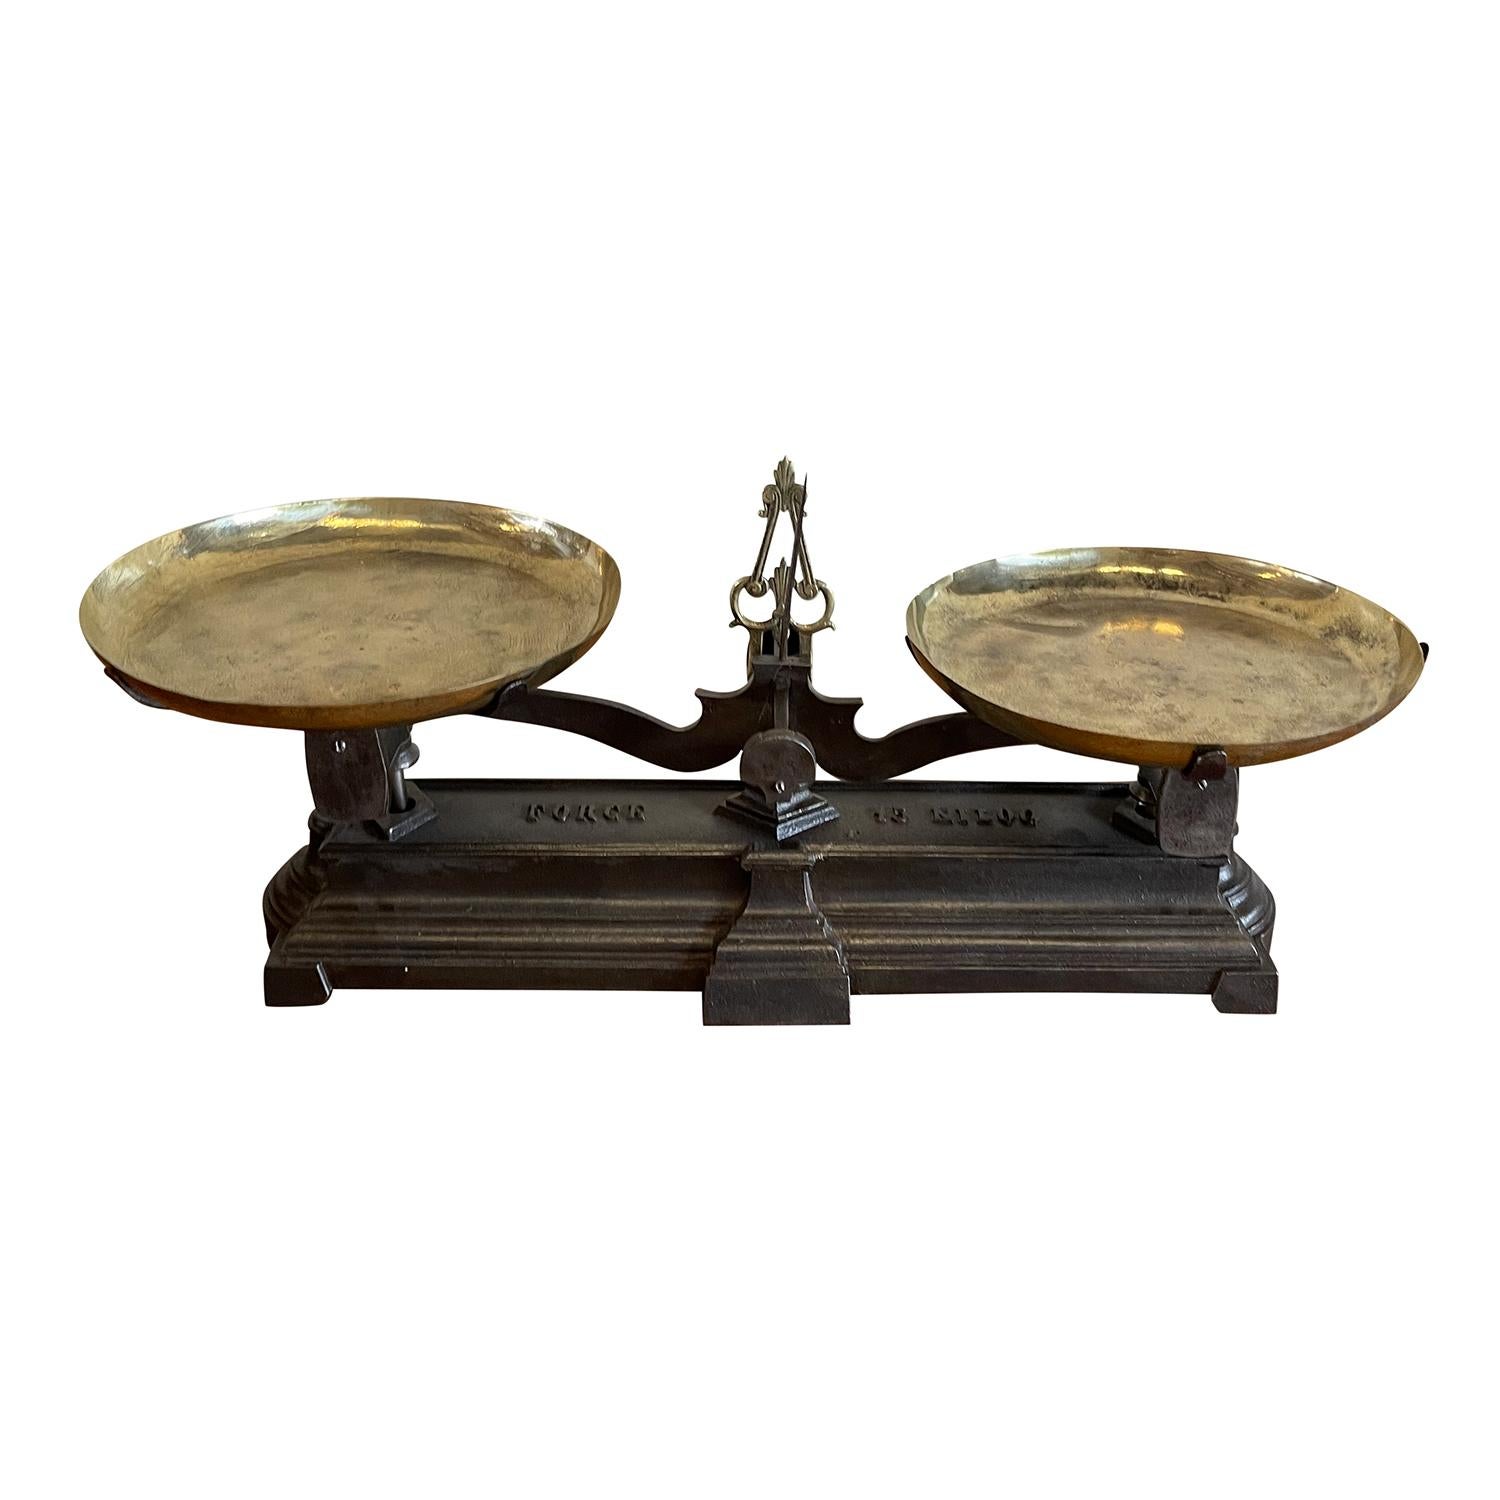 19th Century French Iron Balance - Antique Brass Scale In Good Condition For Sale In West Palm Beach, FL